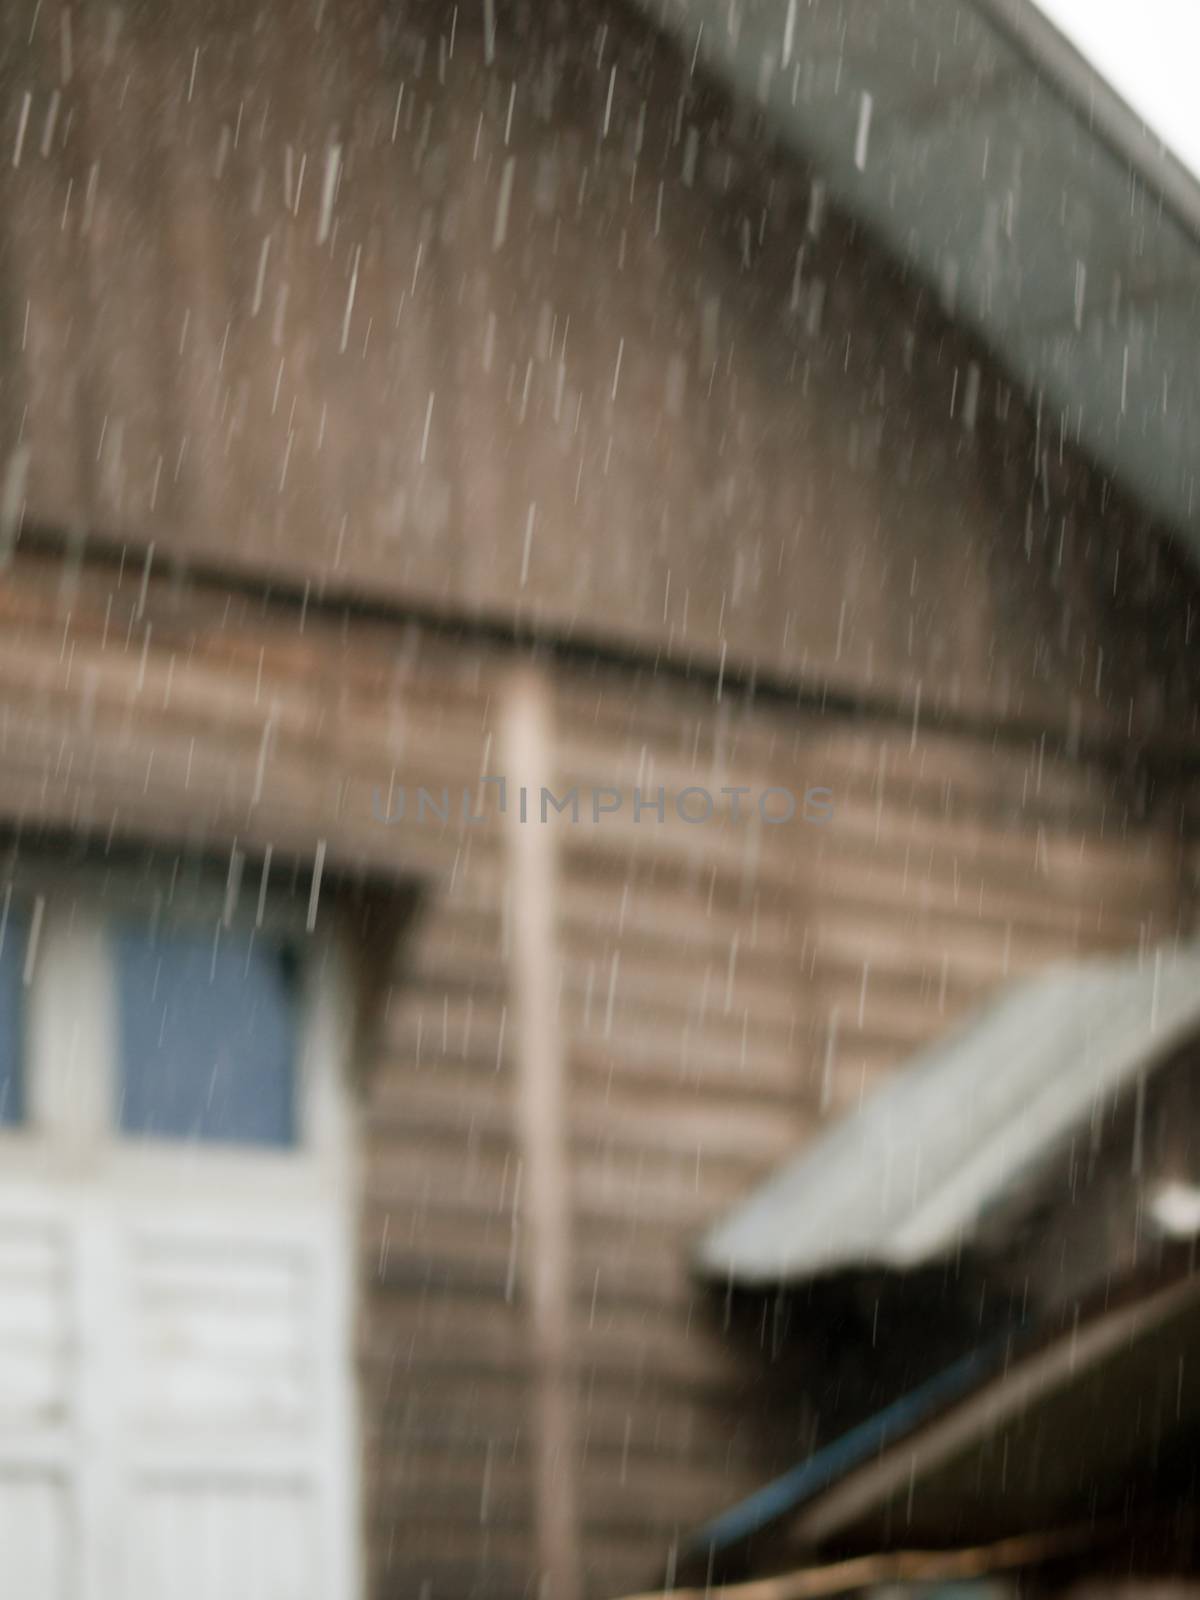 COLOR PHOTO OF BLURRY SHOT OF RAINDROPS